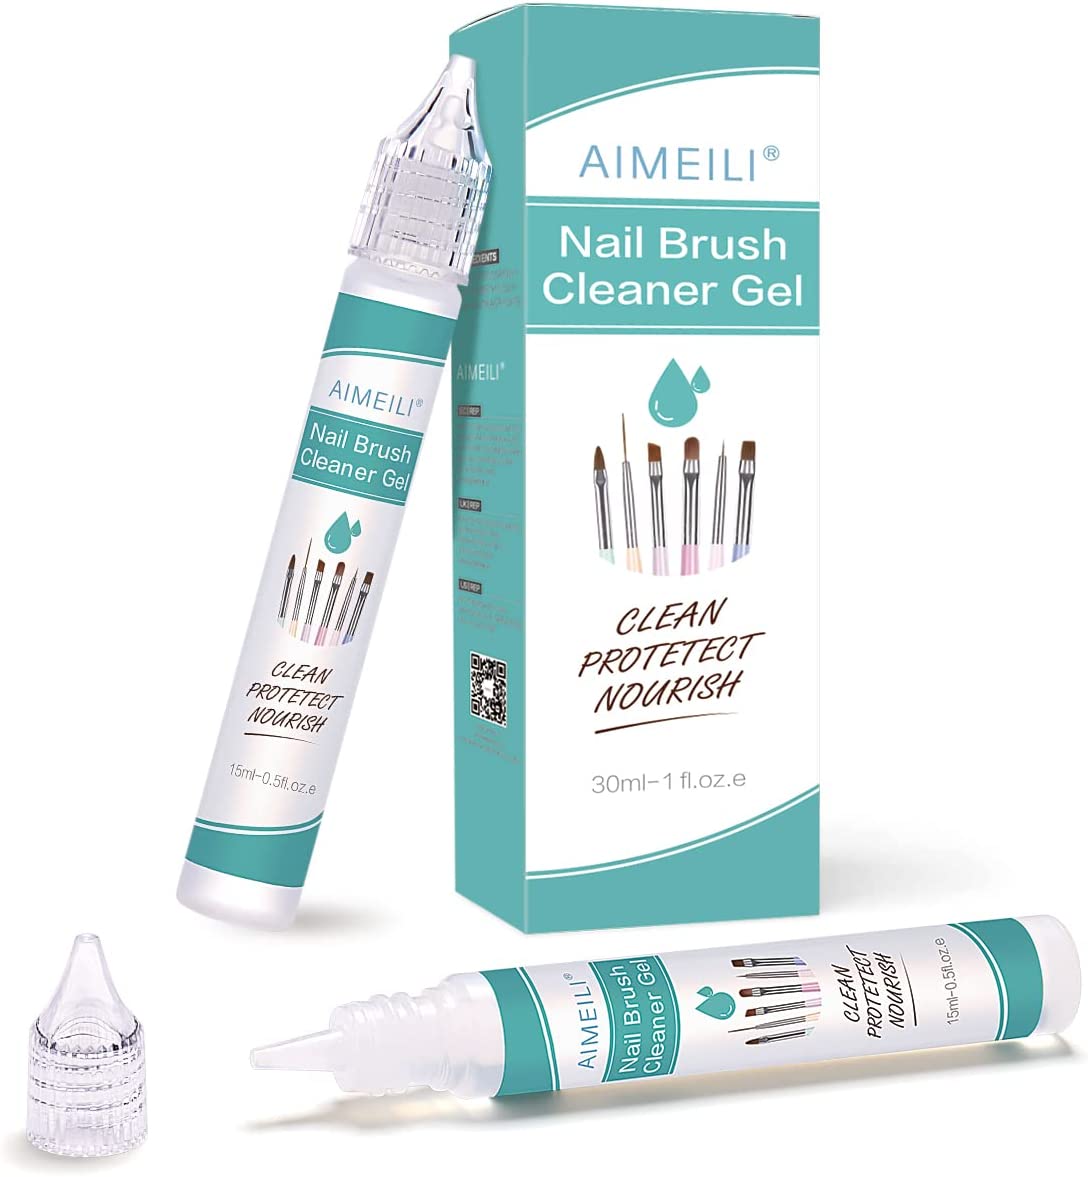 Artisan Nail Brush Cleaner  Quickly Removes Acrylic, Gel Residue & Build Up